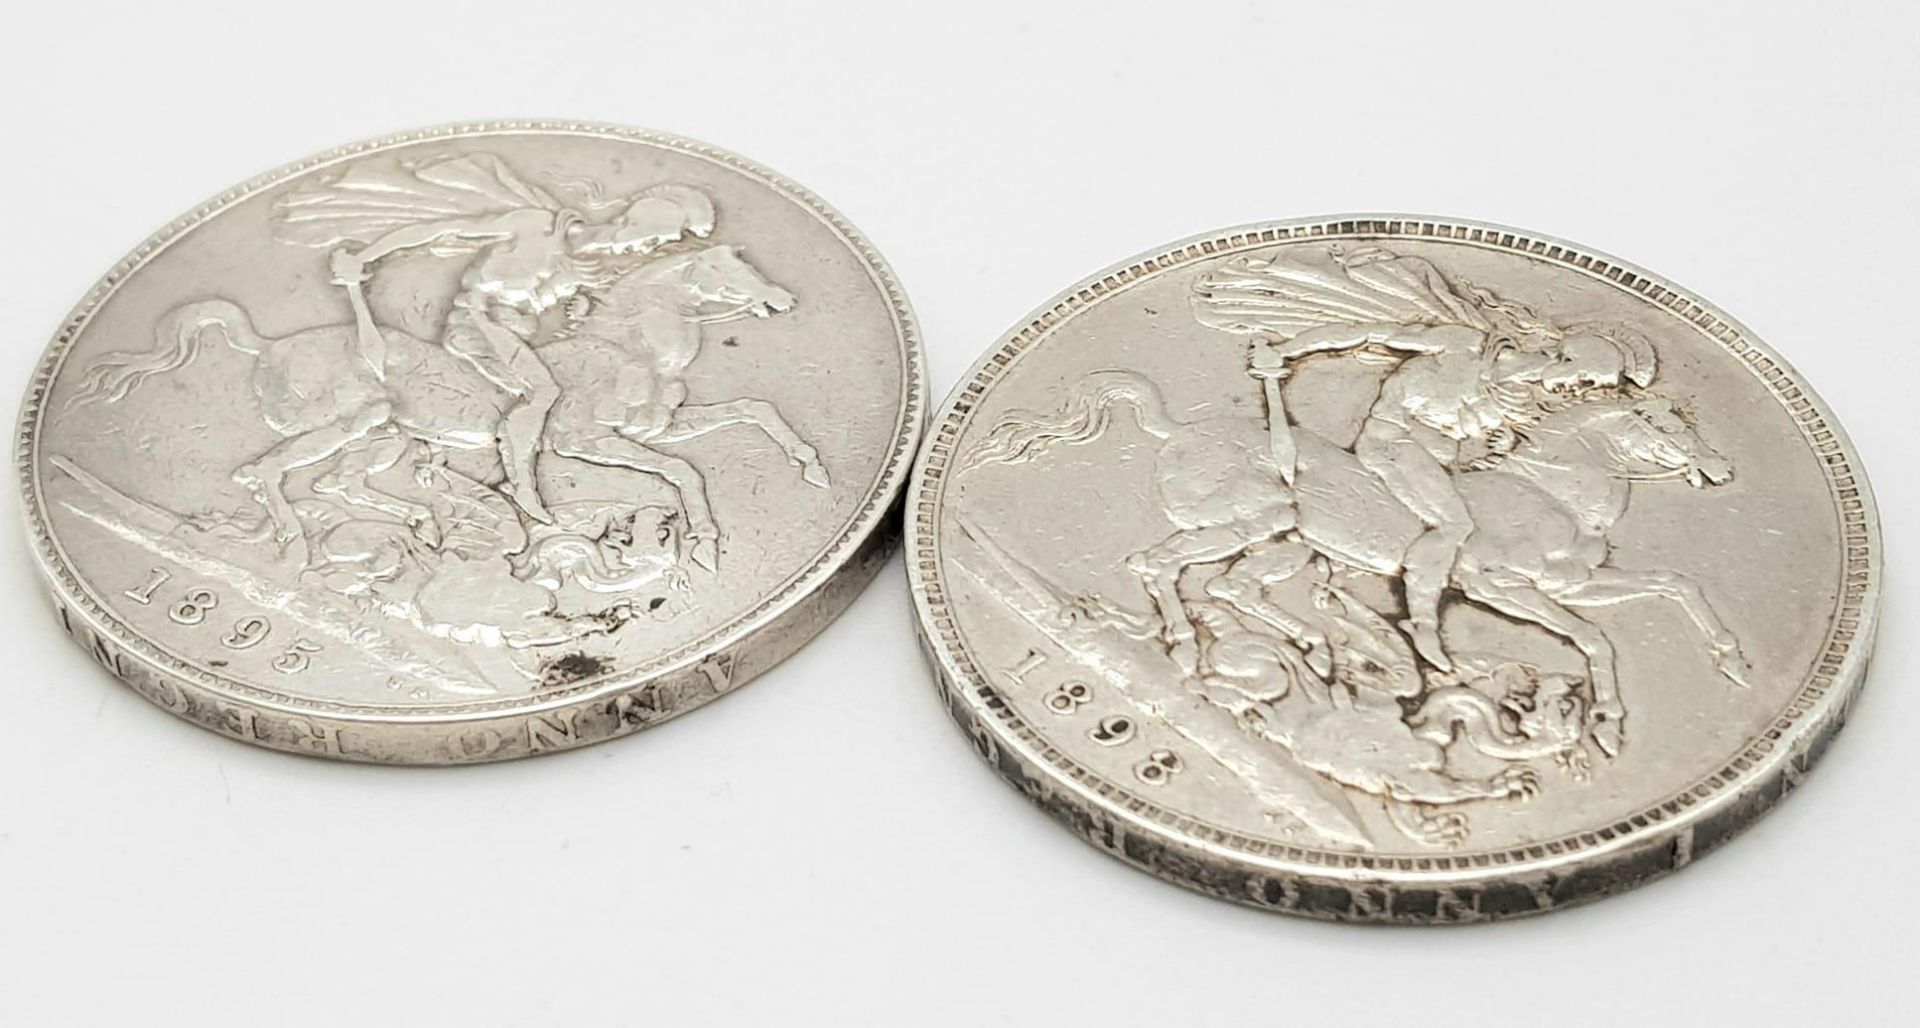 Two Queen Victoria Silver Crown Coins - 1895 and 1898. Please see photos for conditions. - Image 2 of 3